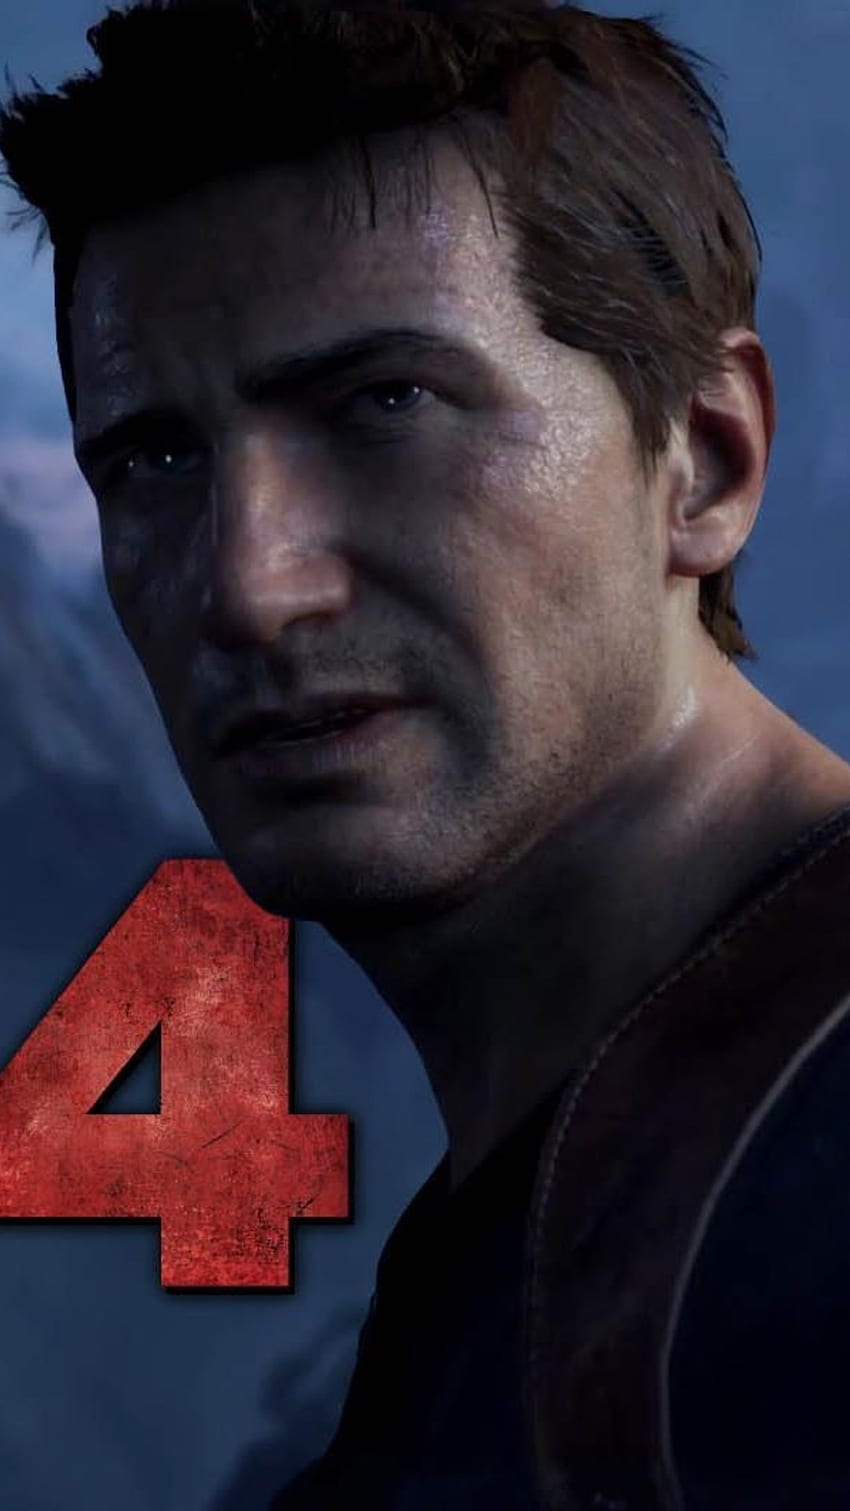 uncharted 4, games, pc games, ps games, xbox games for iPhone 6, 7, 8 HD phone wallpaper